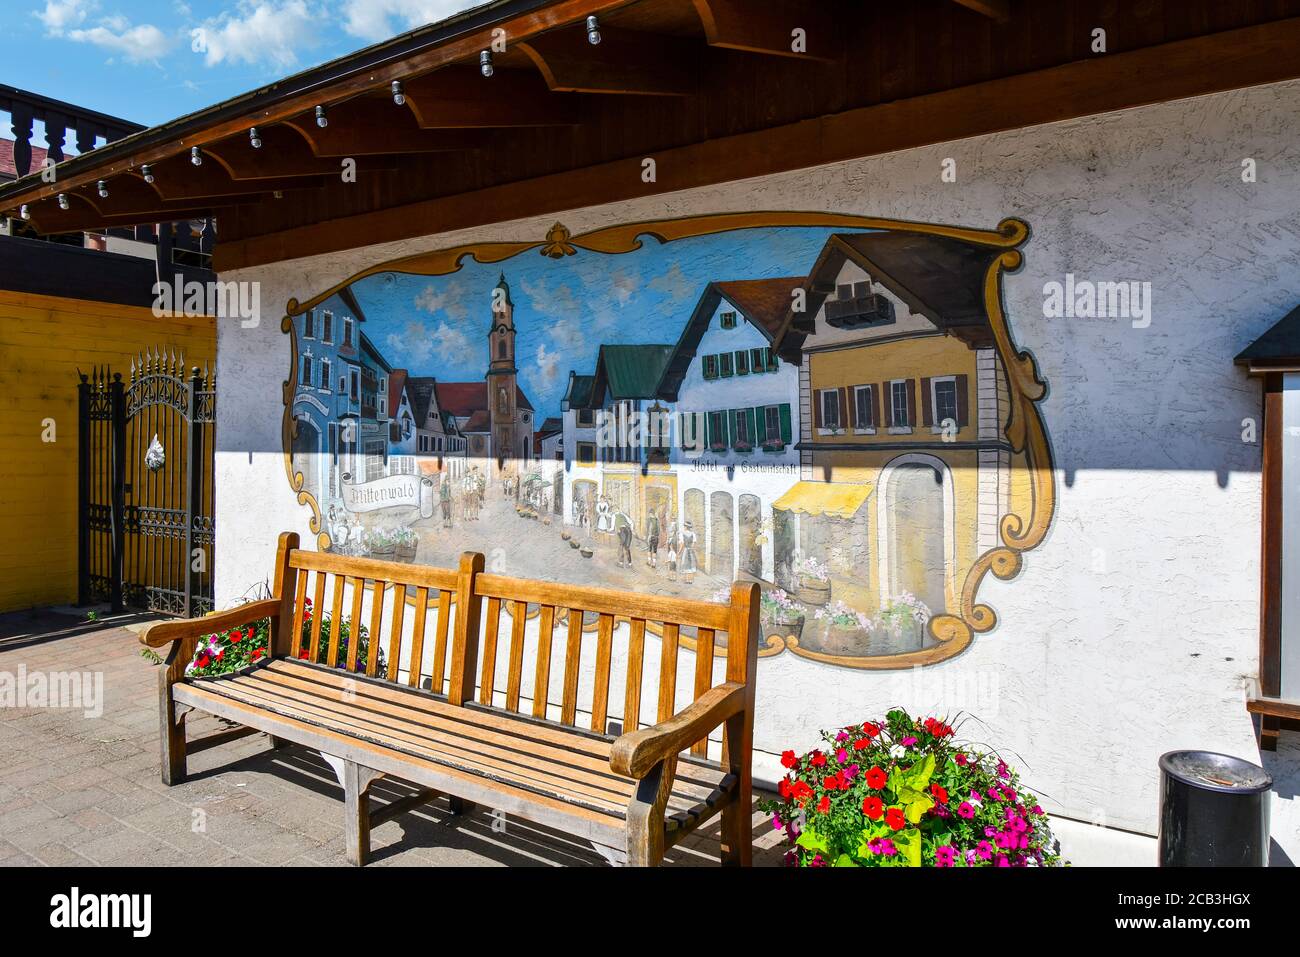 A bench with flowers and a colorful painted mural of the Bavarian themed Old Town in Leavenworth Washington, USA. Stock Photo